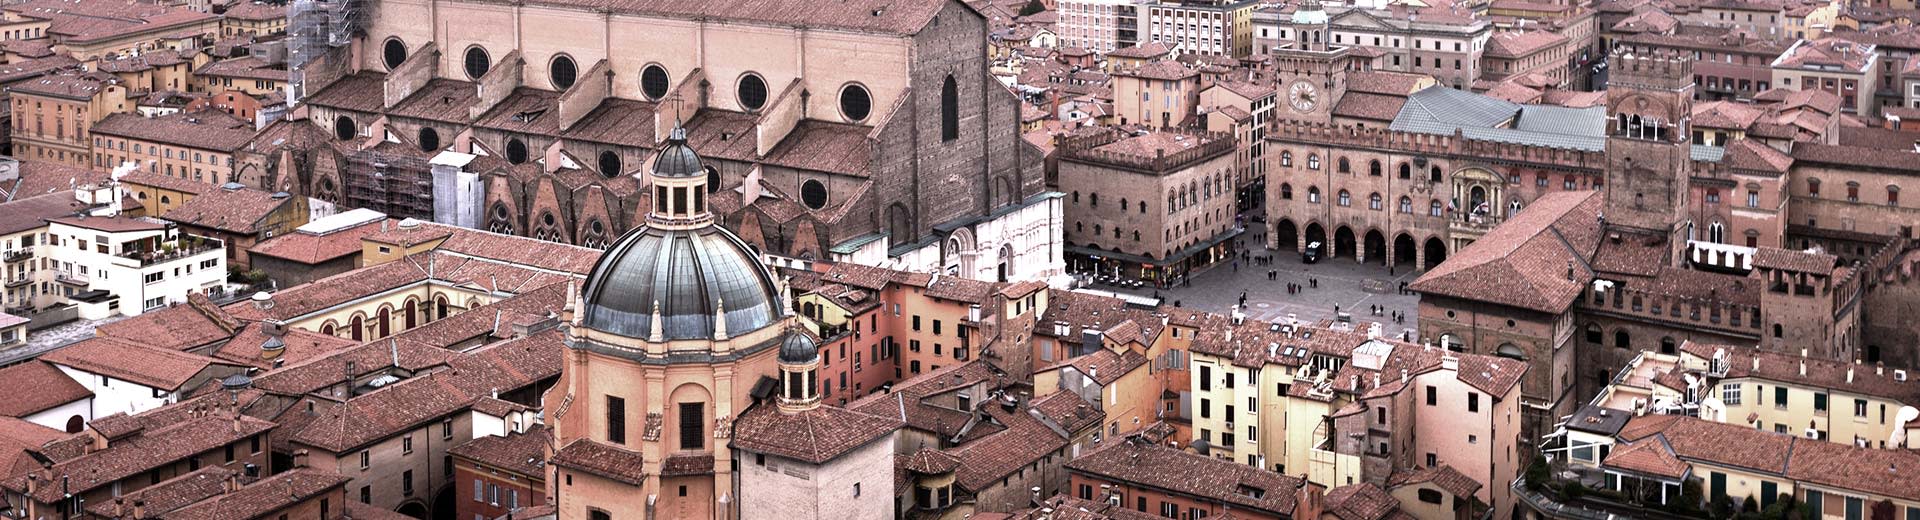 Birds eye view of Bologna city center with the chapel in the center.